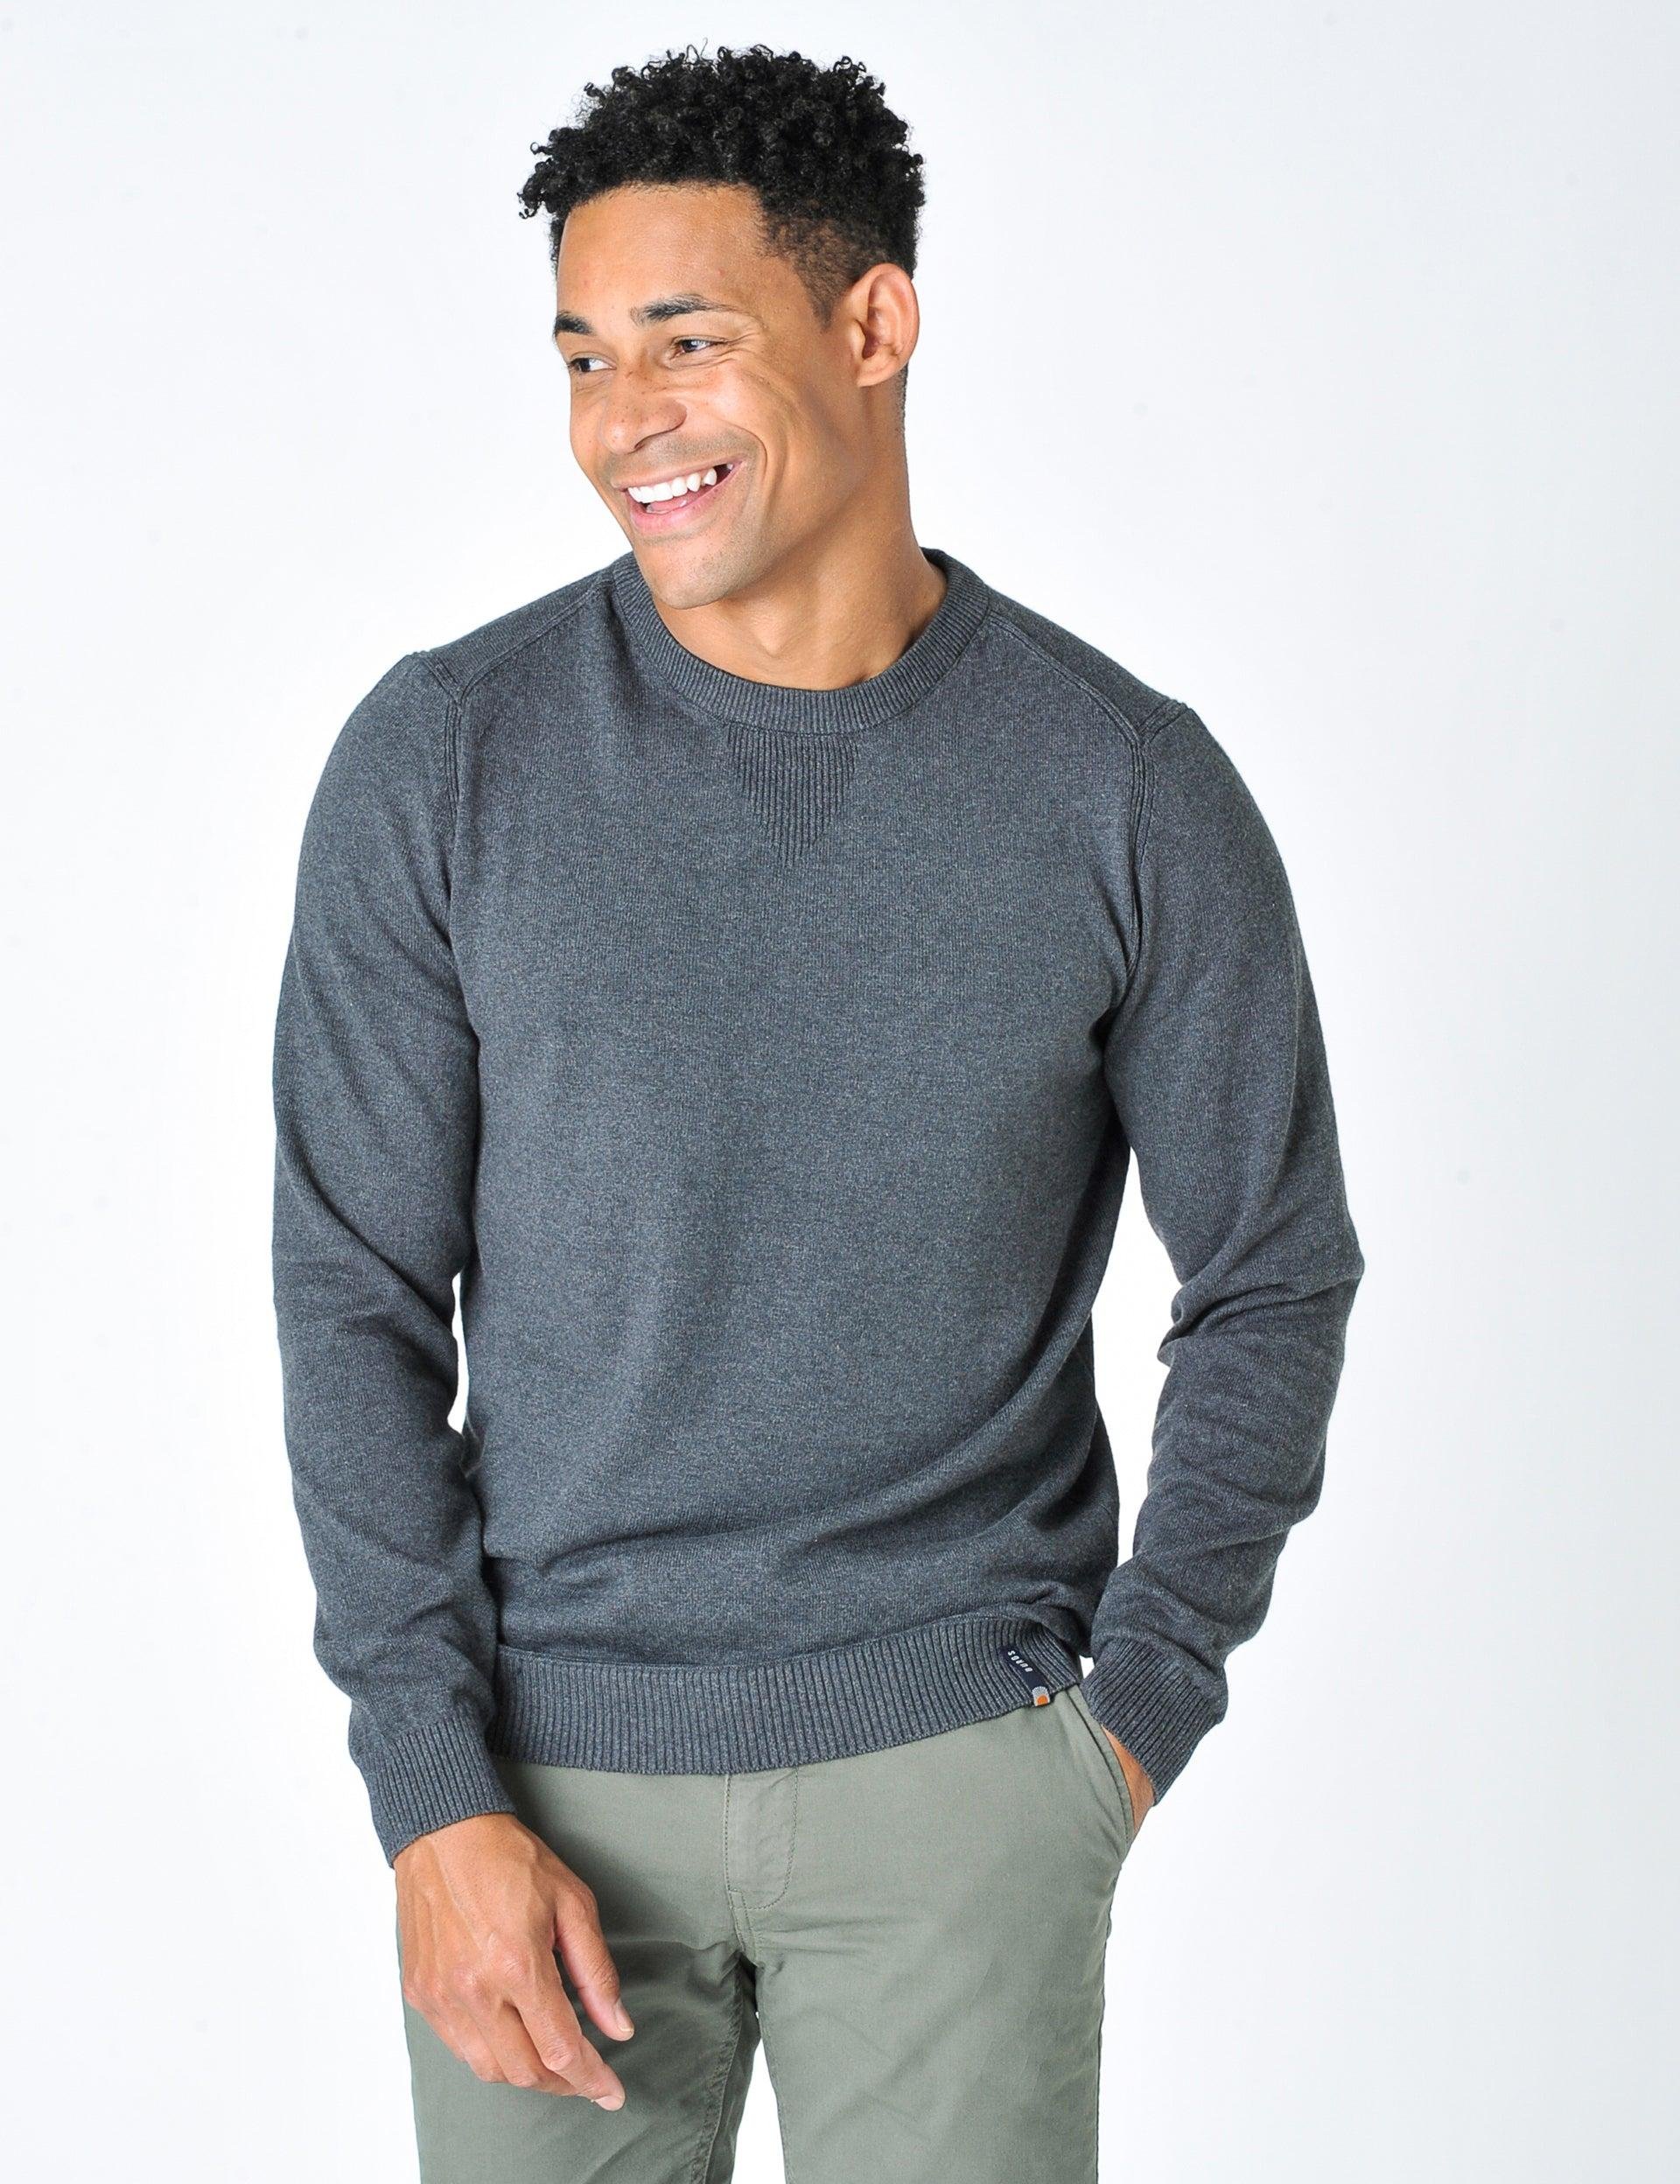 Harford Jumper Charcoal Grey by BURGS